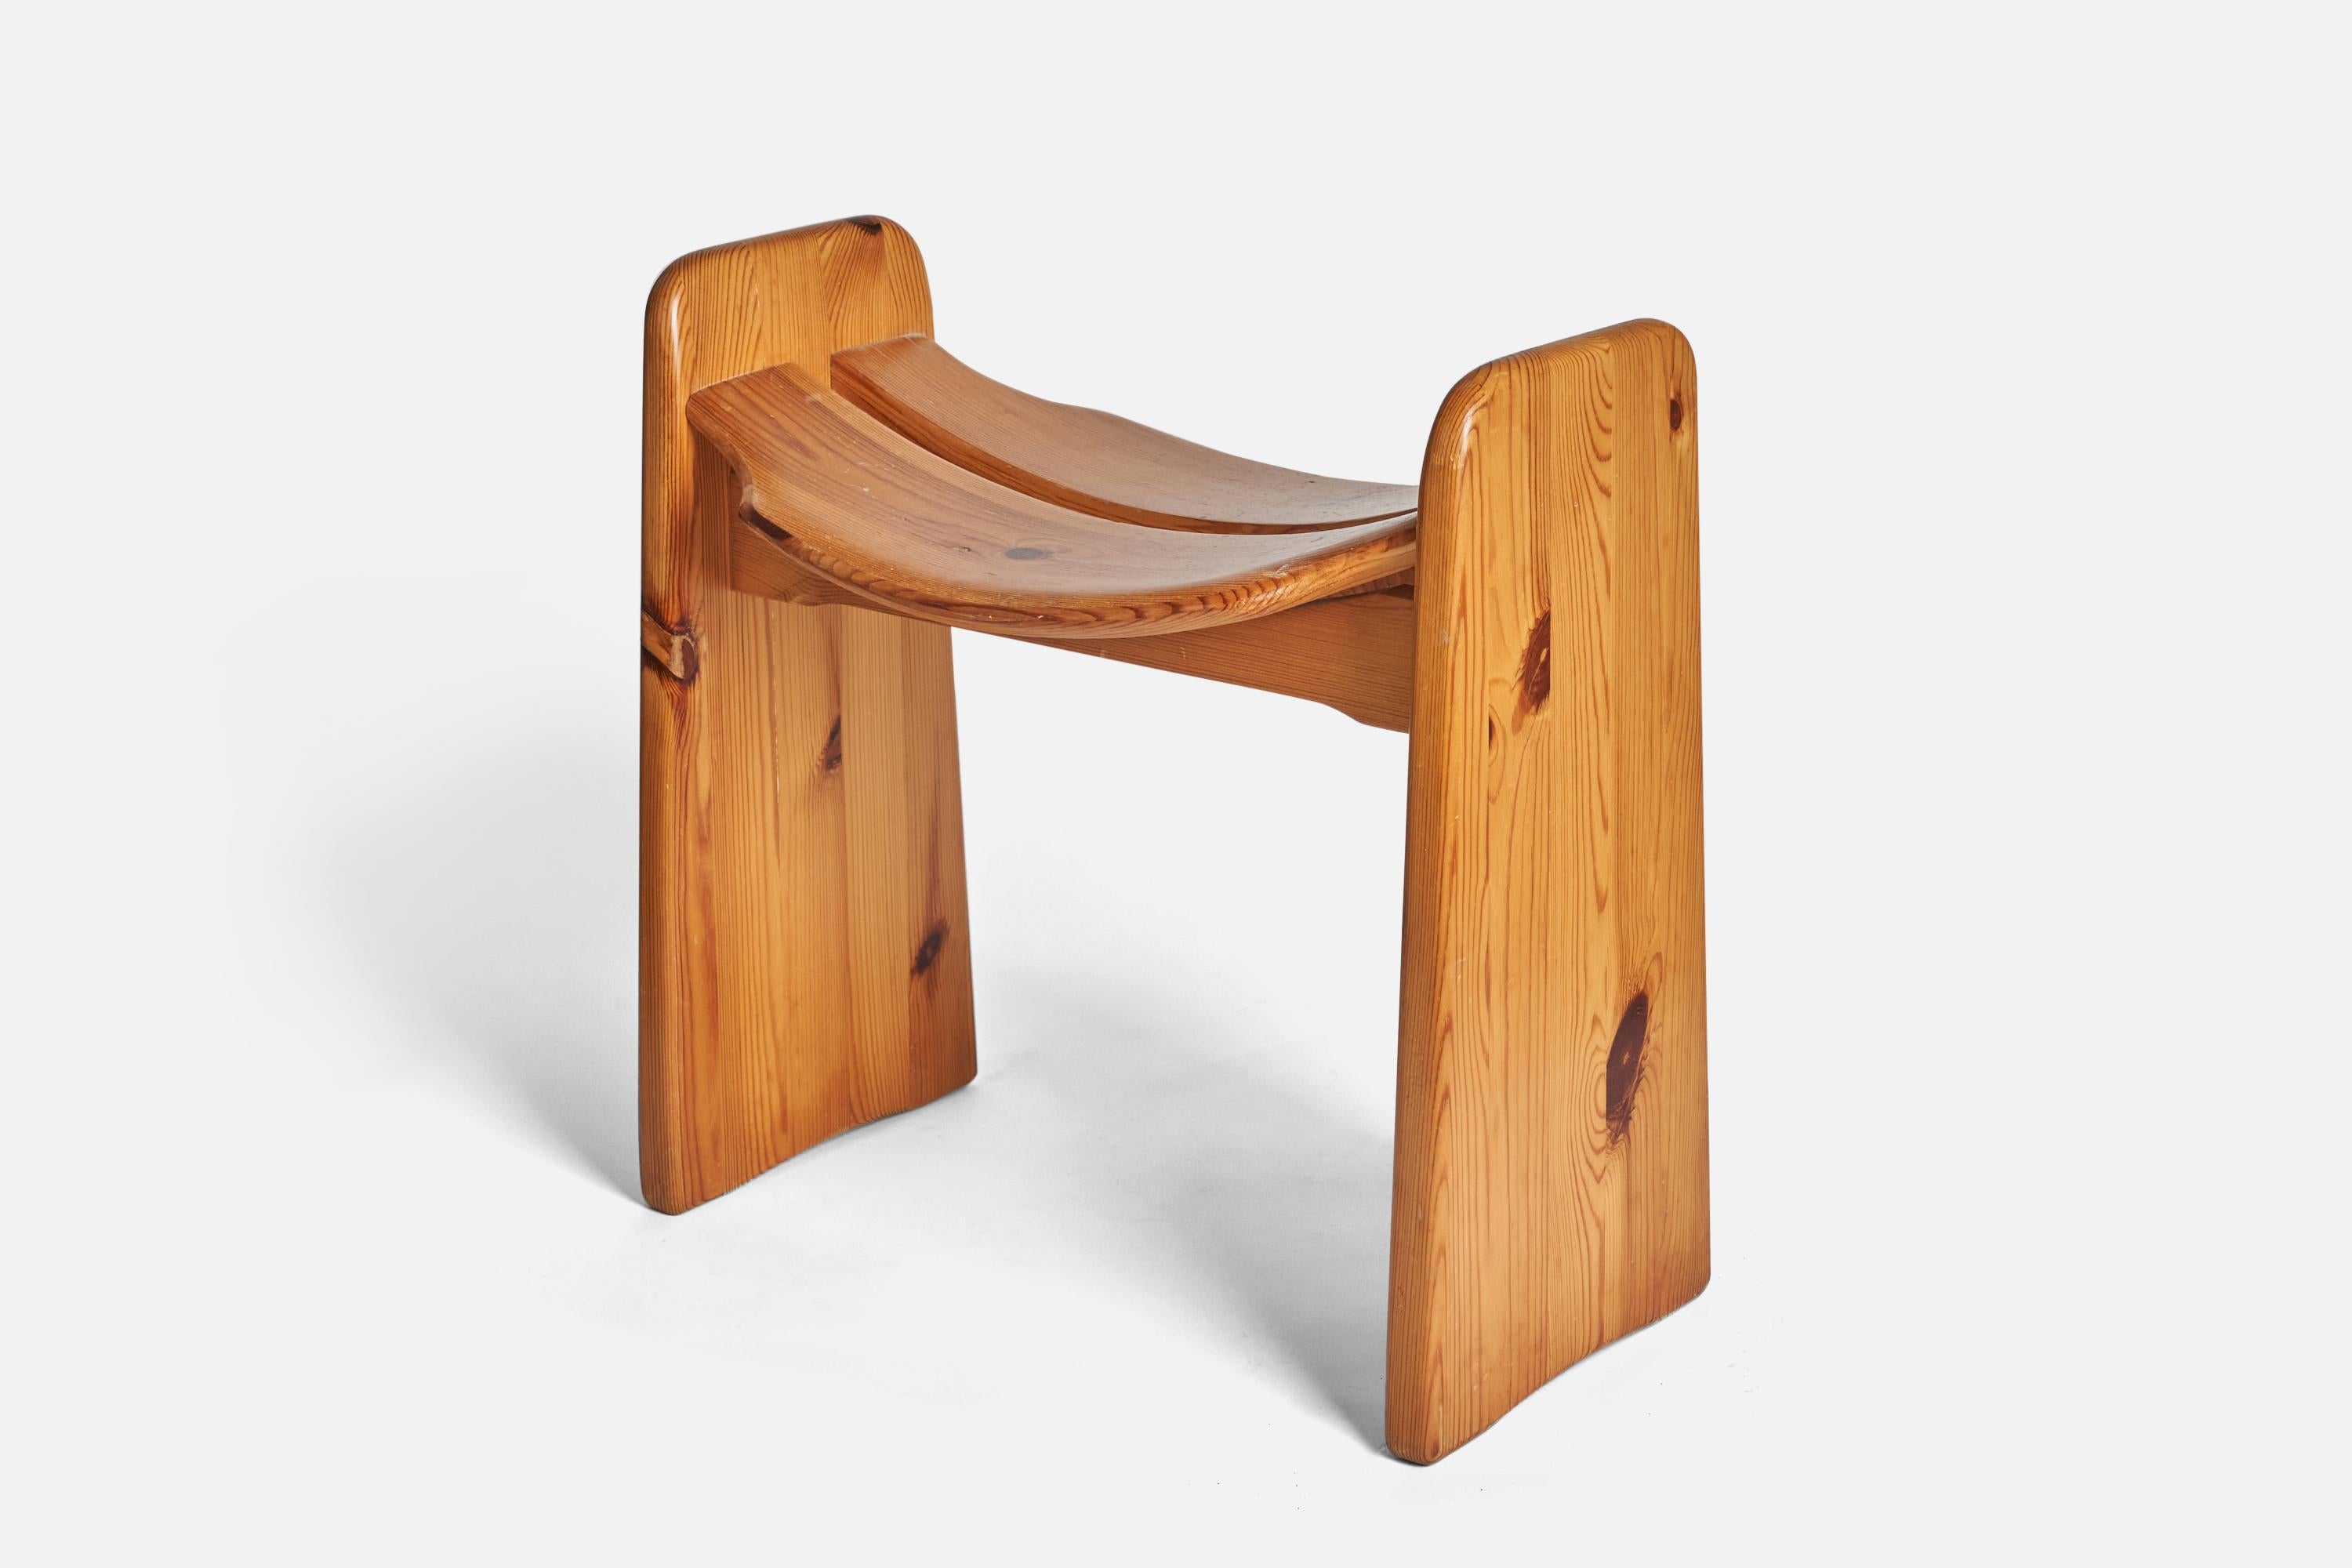 A solid pine stool designed by Gilbert Marklund and produced by his own firm 